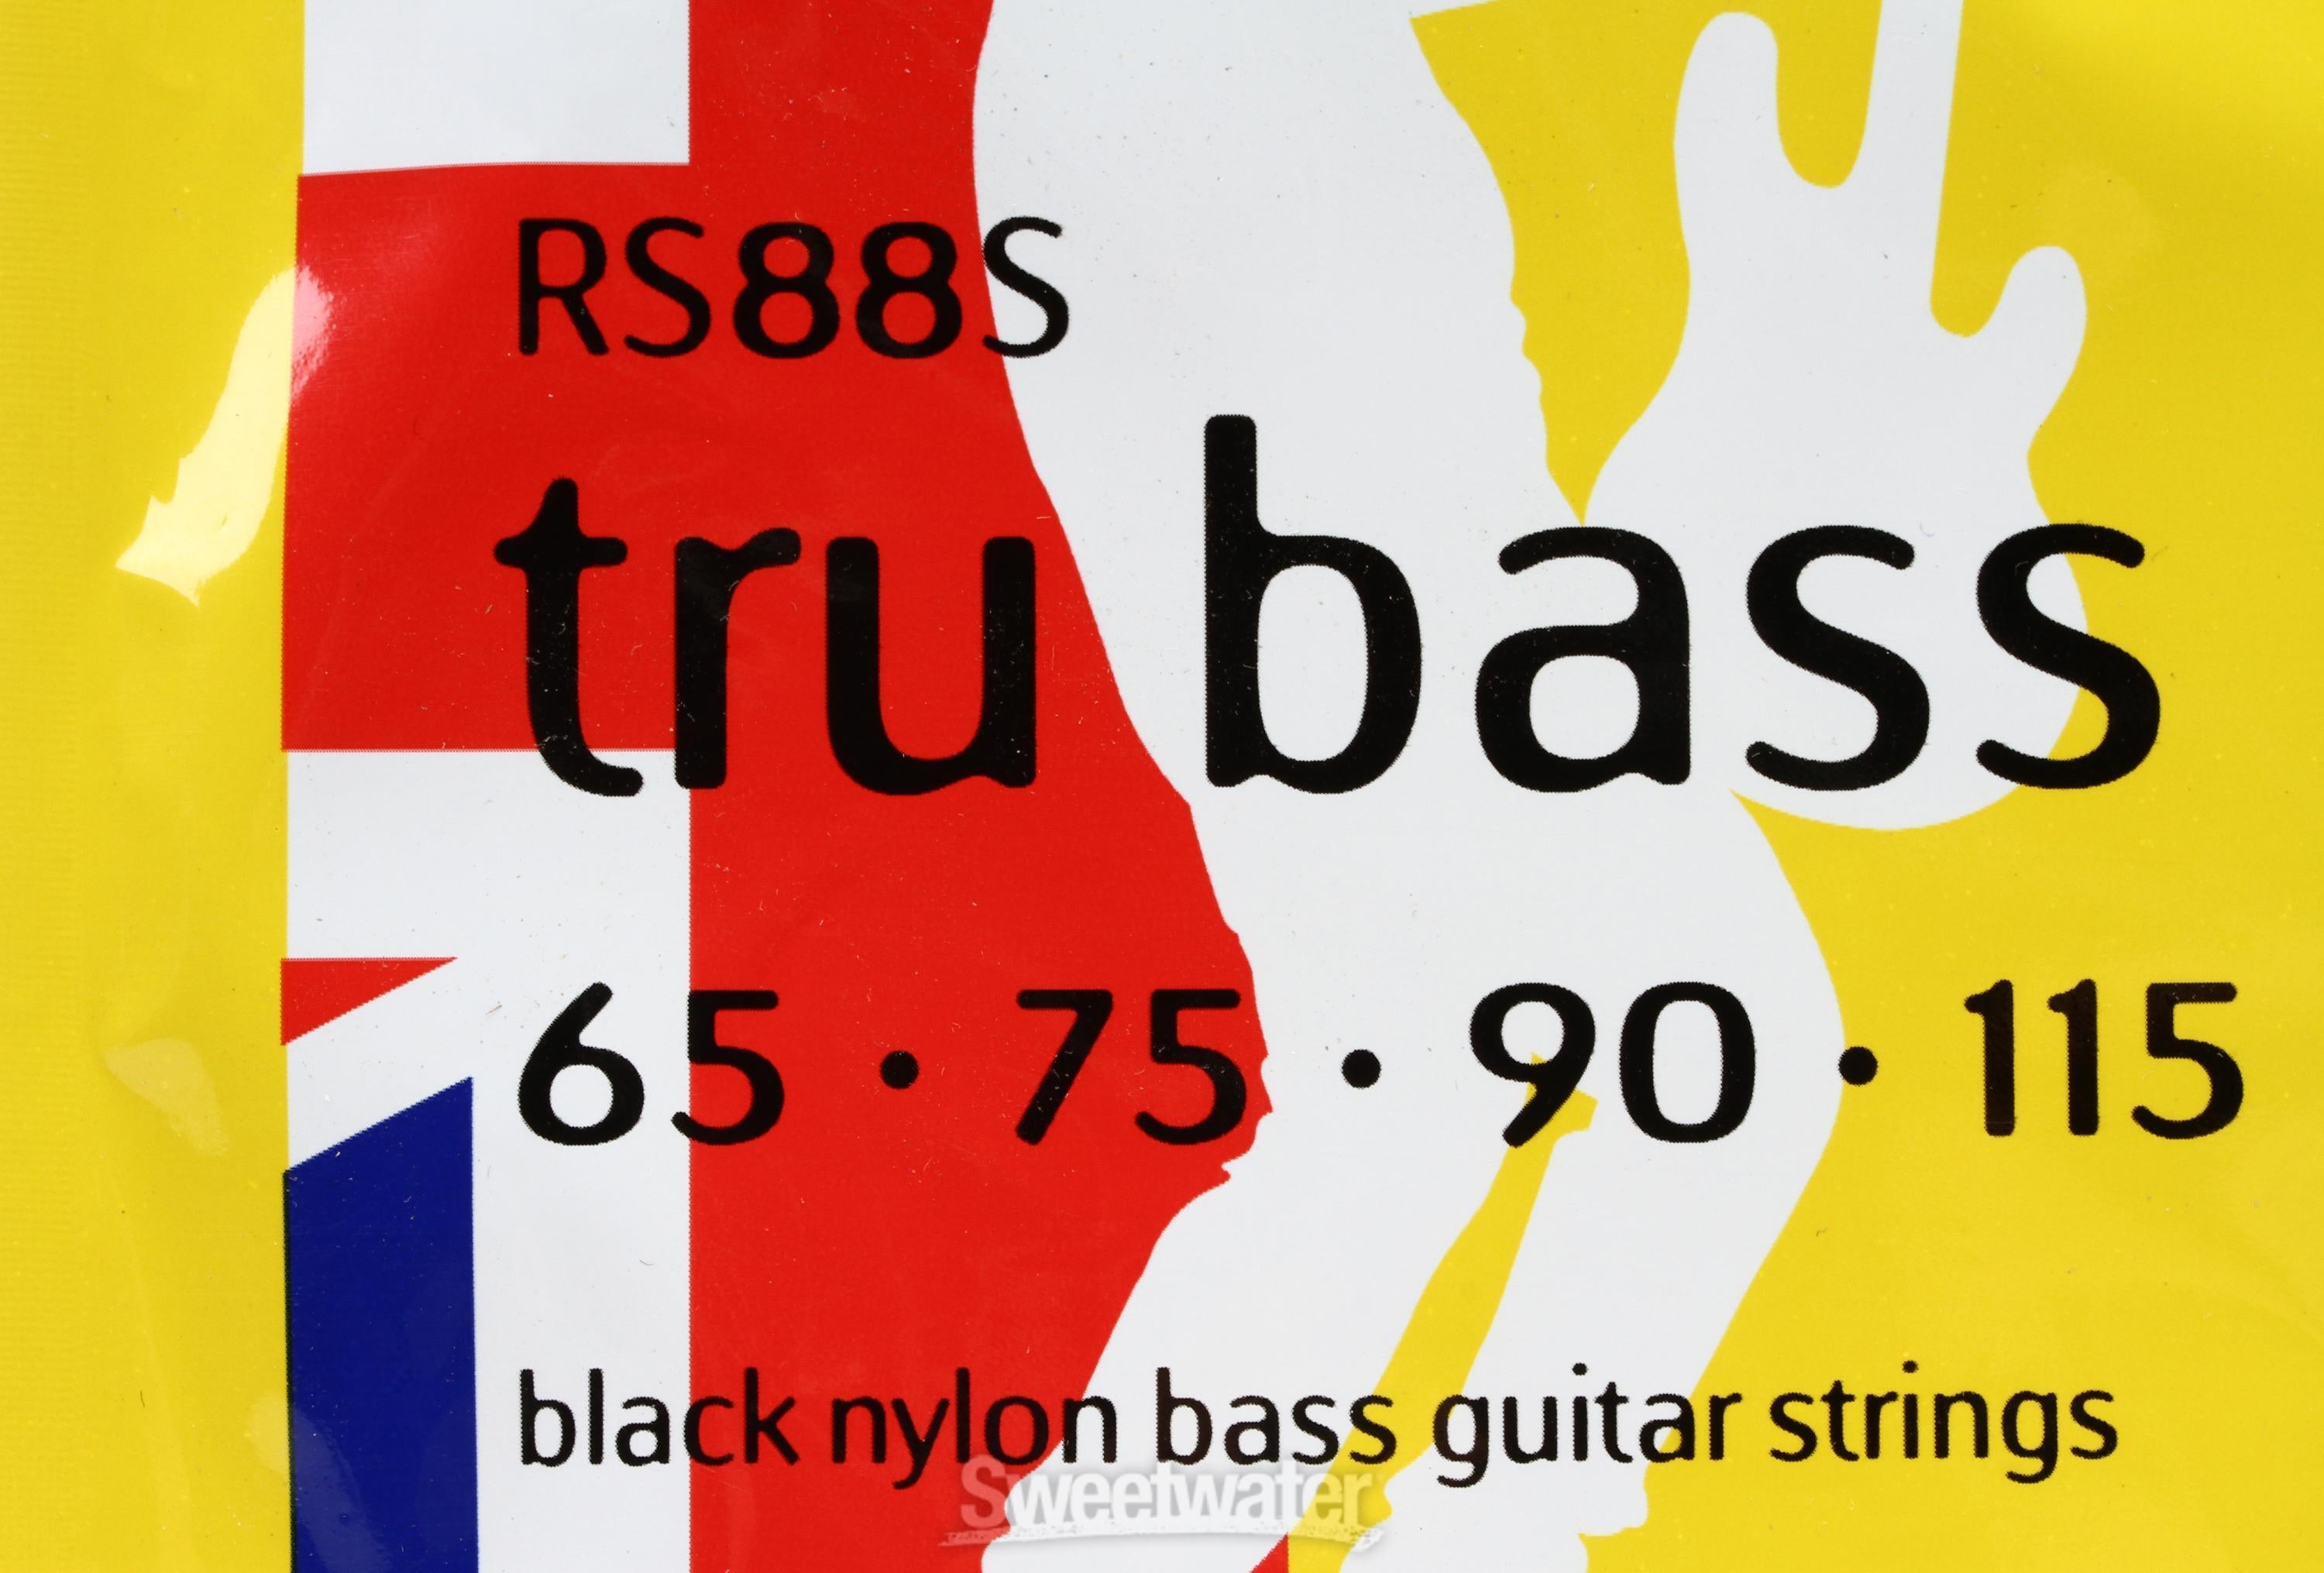 Rotosound RS88S Tru Bass 88 Black Nylon Tapewound Bass Guitar Strings -  .065-.115 Standard Short Scale 4-string